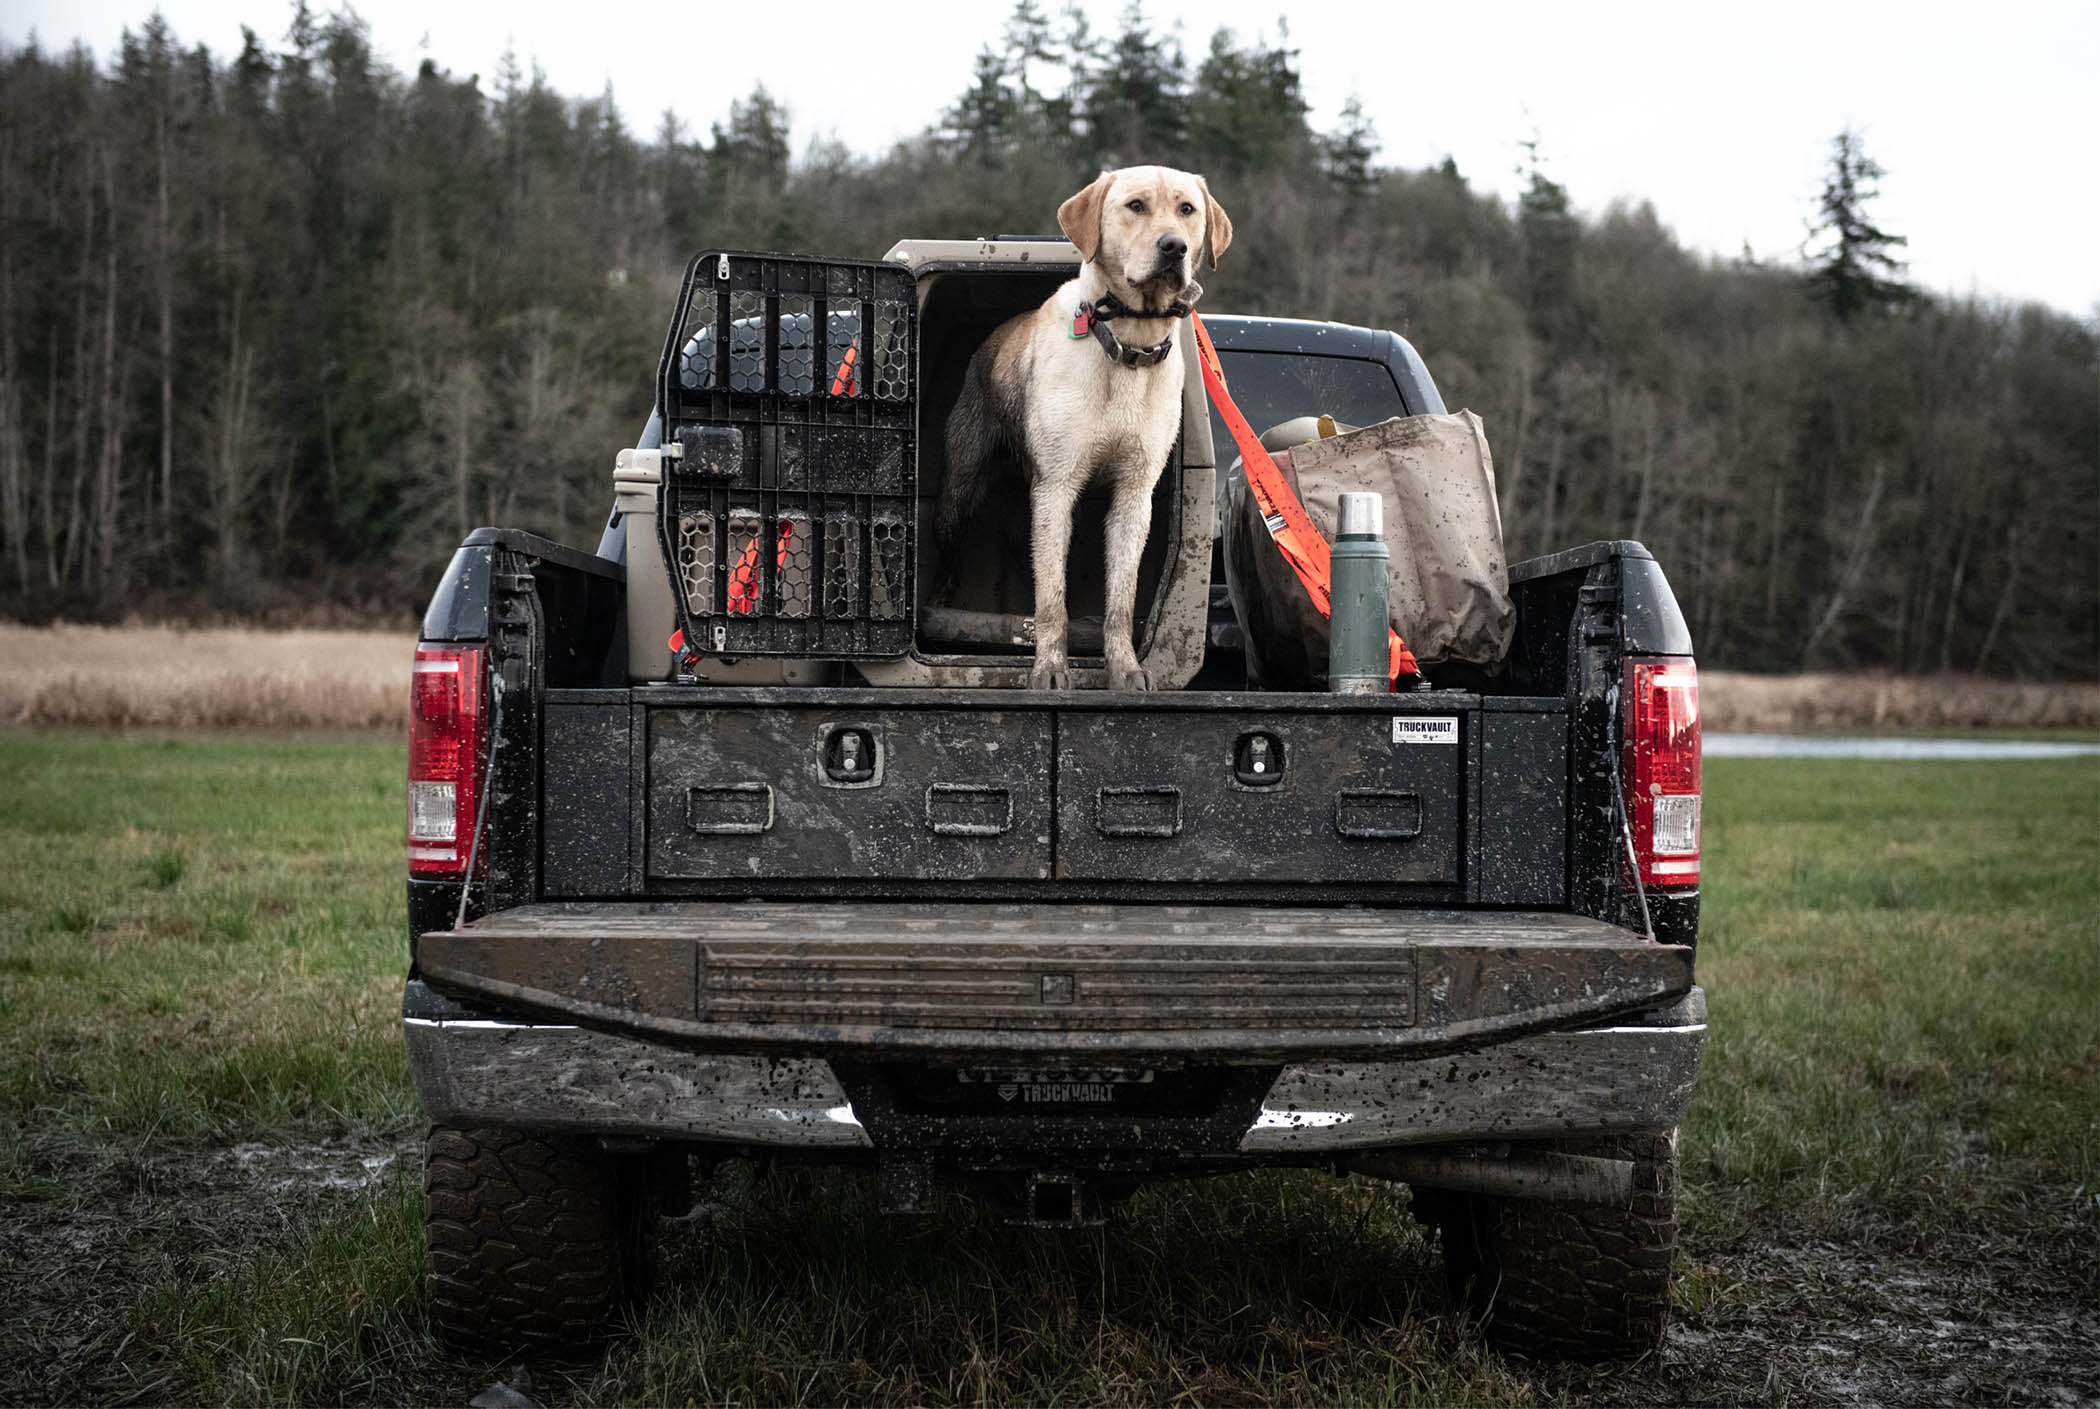 A hunting dog on top of a muddy all-weather TruckVault system for storing guns.